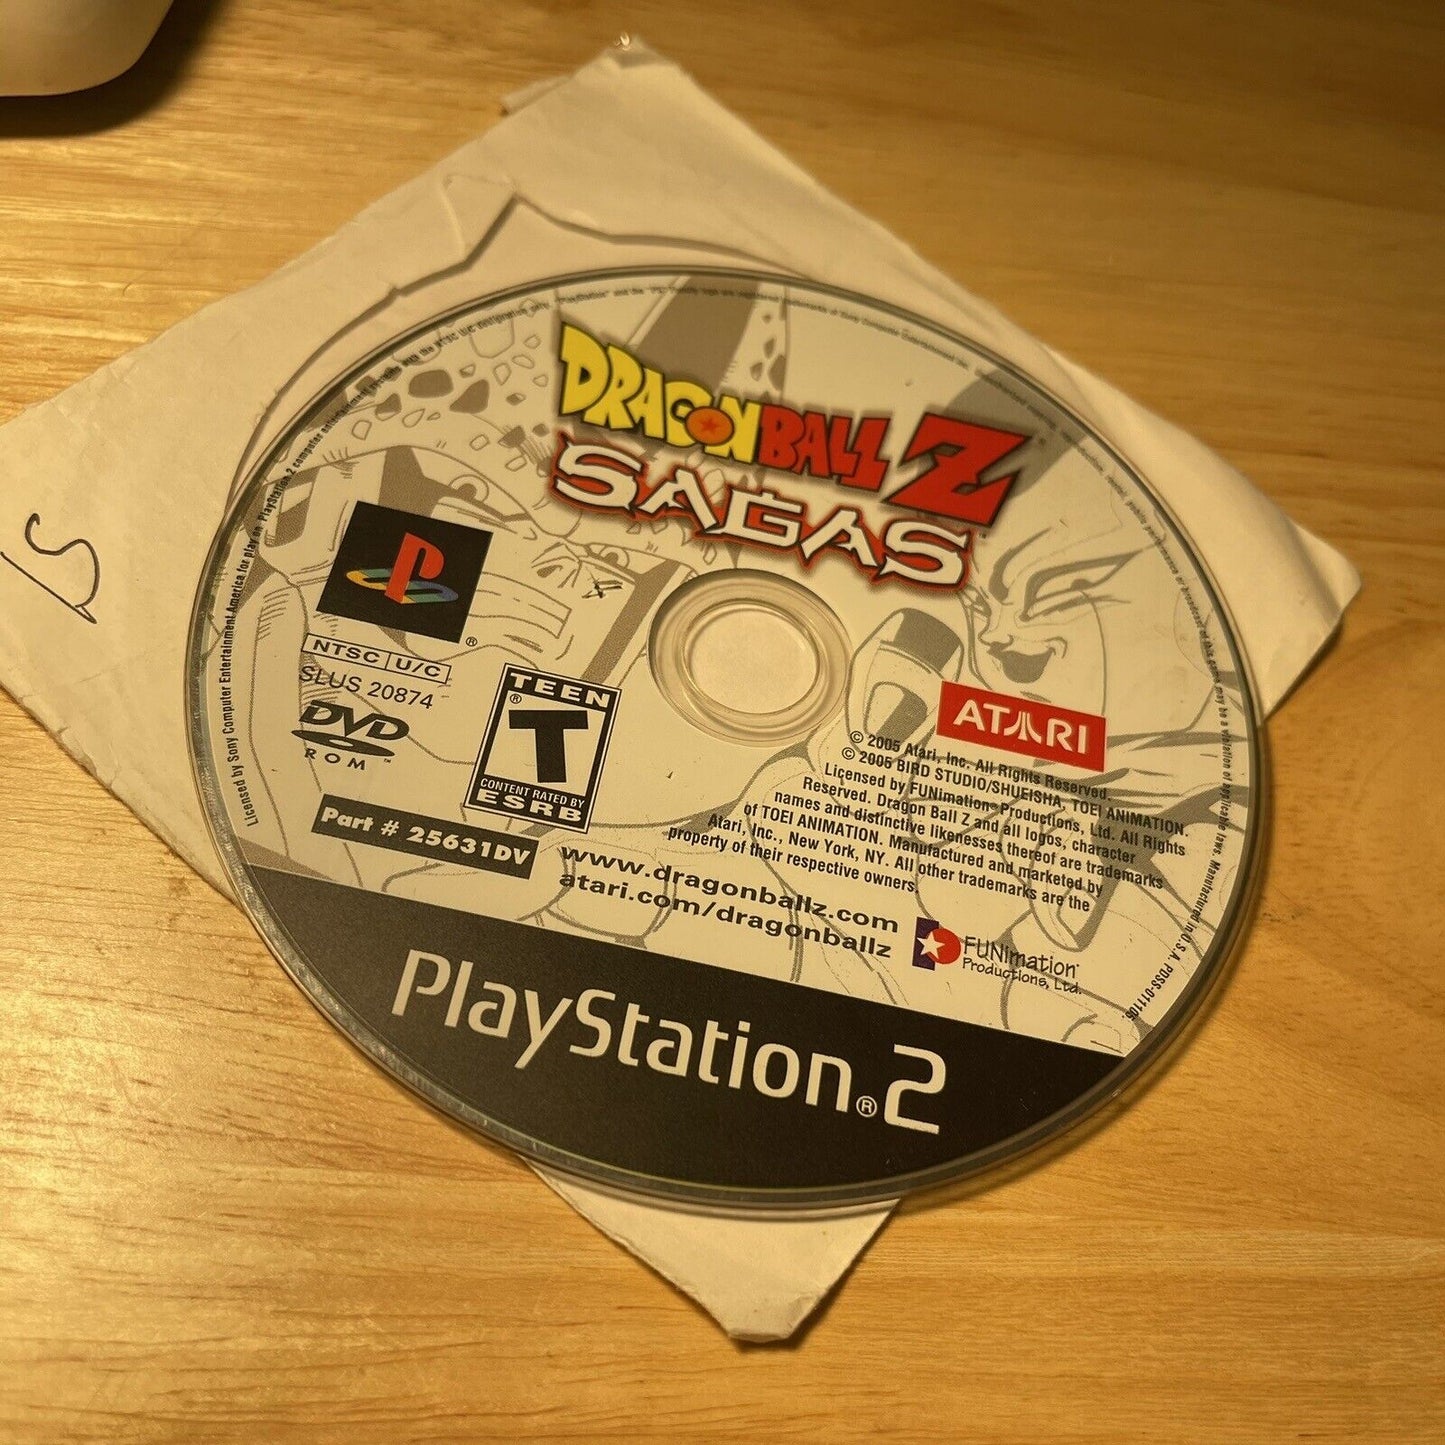 Dragon Ball Z Sagas PS2 PlayStation 2 Disc Only - (See Pics)